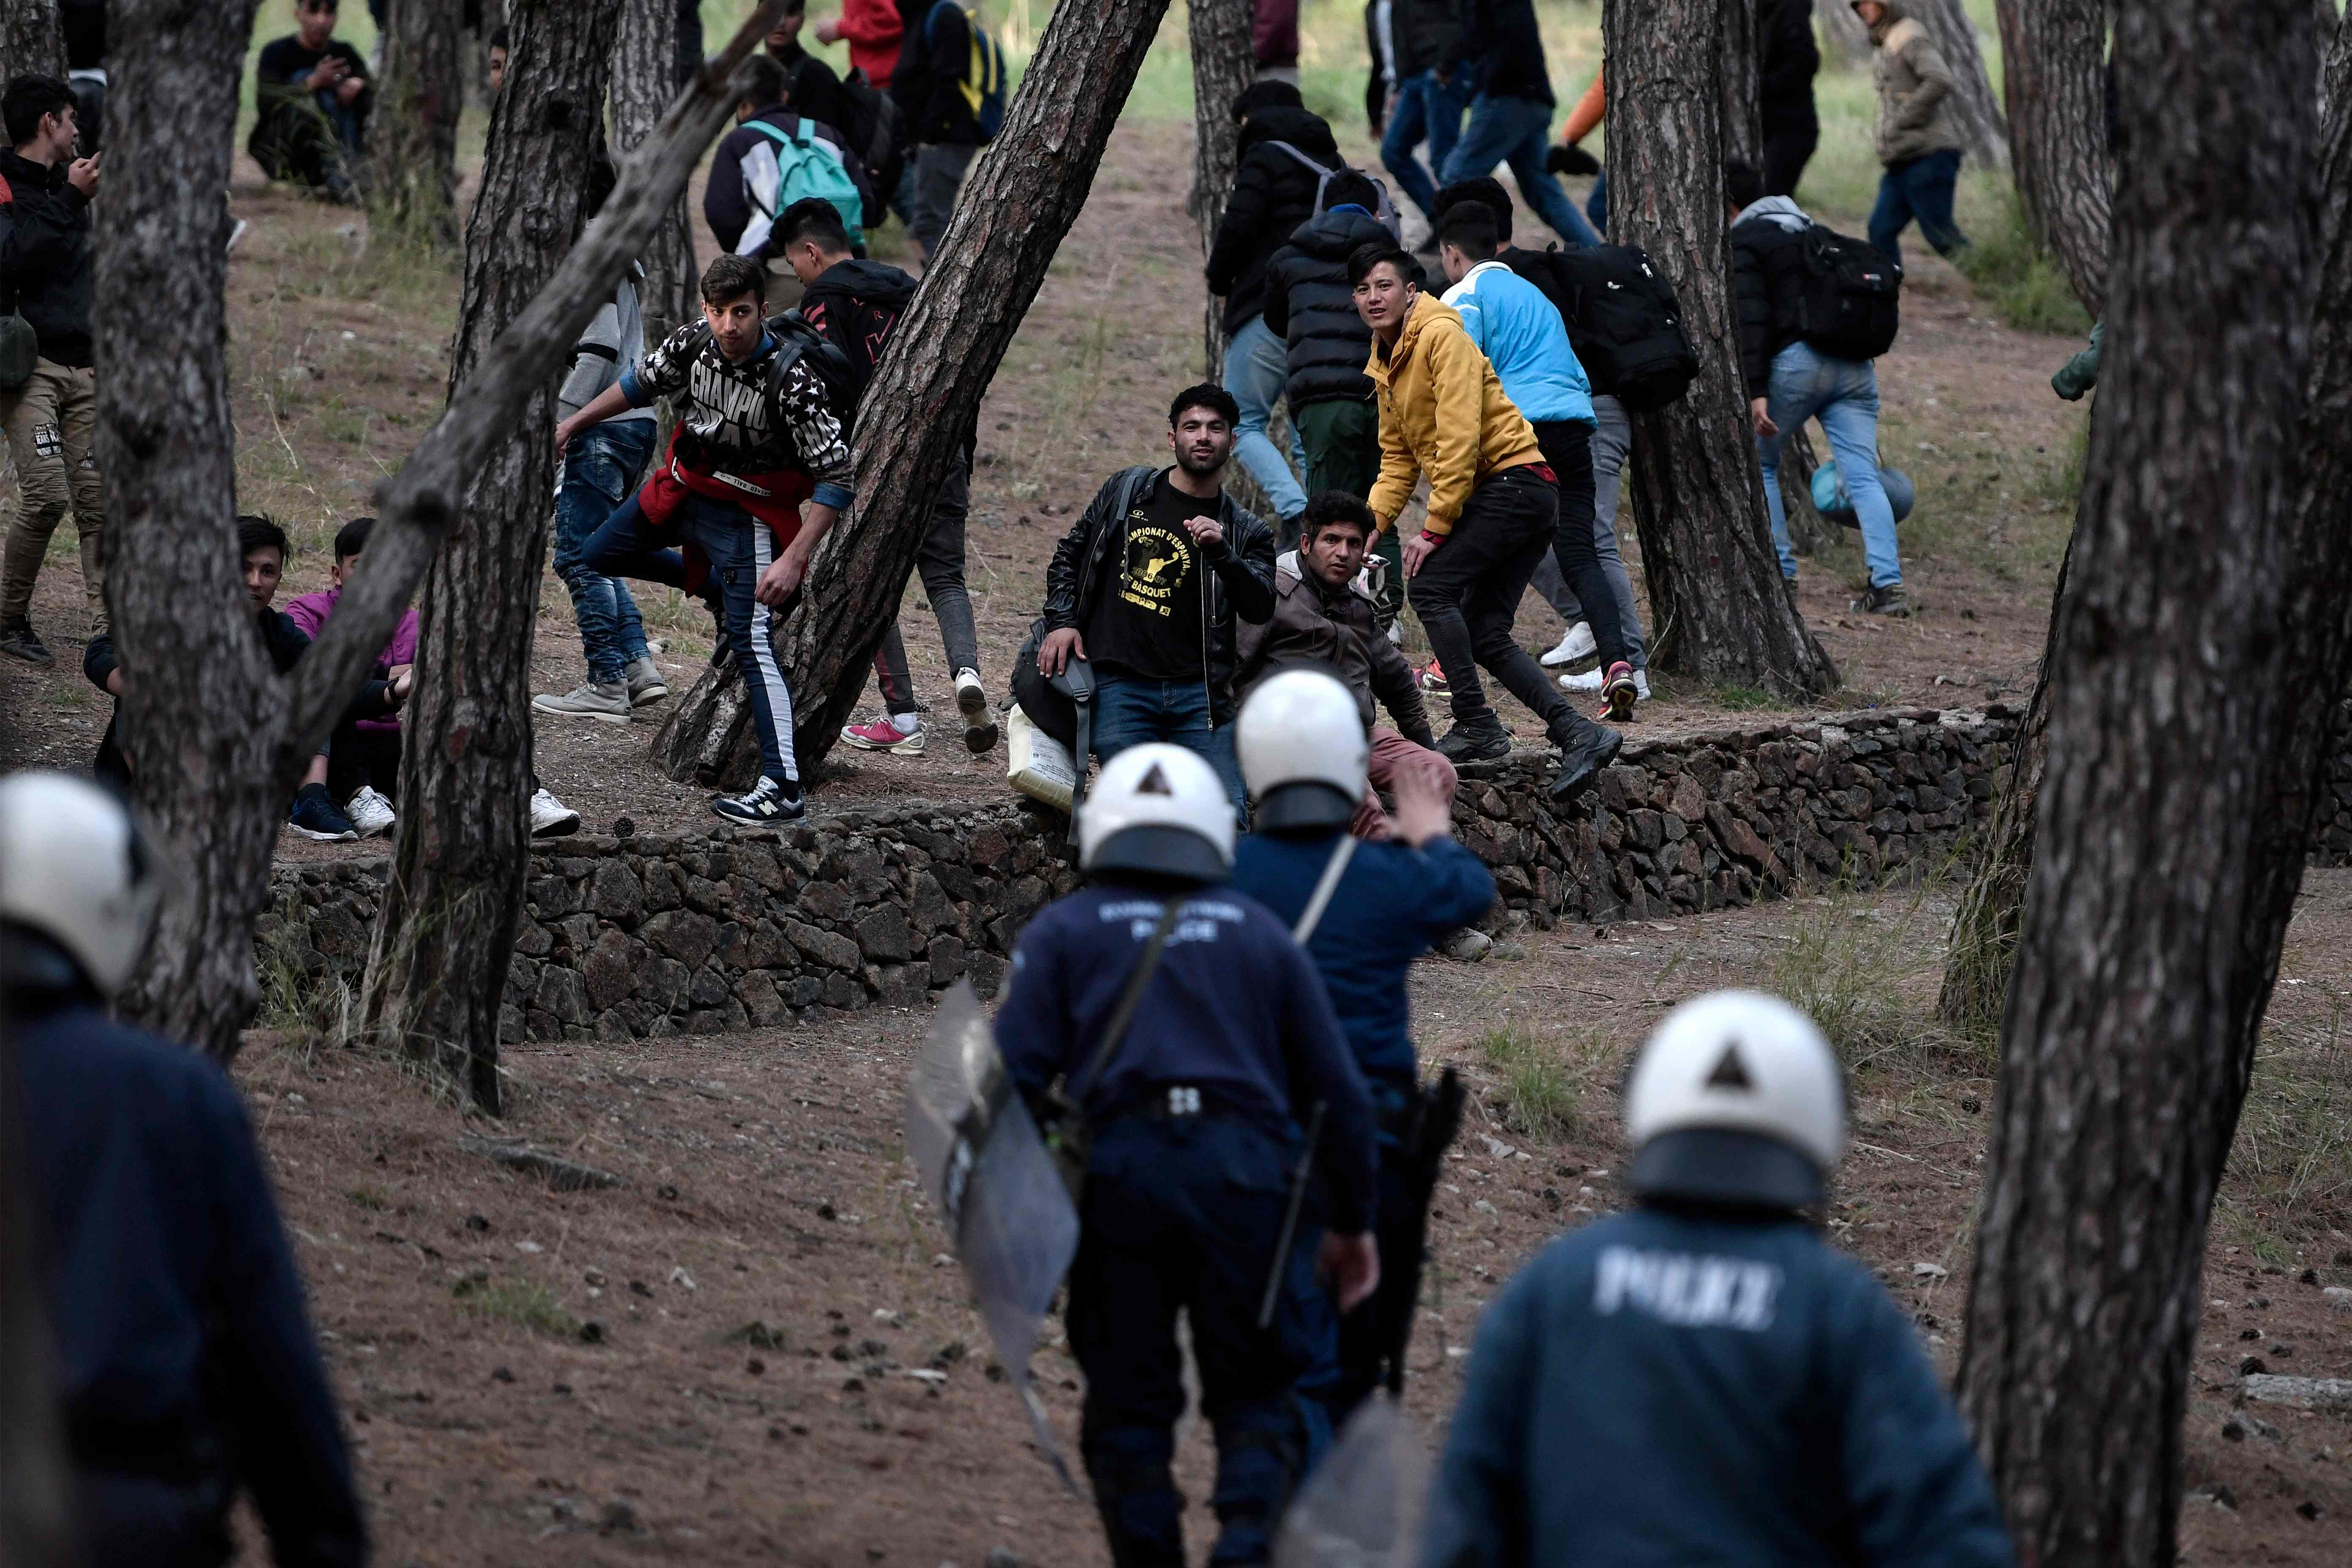 TOPSHOT - Migrants run from riot police after being pushed to go back to Moria camp from the port of Mytilene, on the island of Lesbos, where they were hoping to get on a ferry to Athens on March 3, 2020. - Several aid groups on Greece's Lesbos said they were suspending work with refugees and evacuating staff on March 3 in the wake of violence and threats, as tensions soar on an island in the crosshairs of the migrant crisis. EU chiefs pledged millions of euros of financial assistance to Greece to help tackle the migration surge. (Photo by LOUISA GOULIAMAKI / AFP)